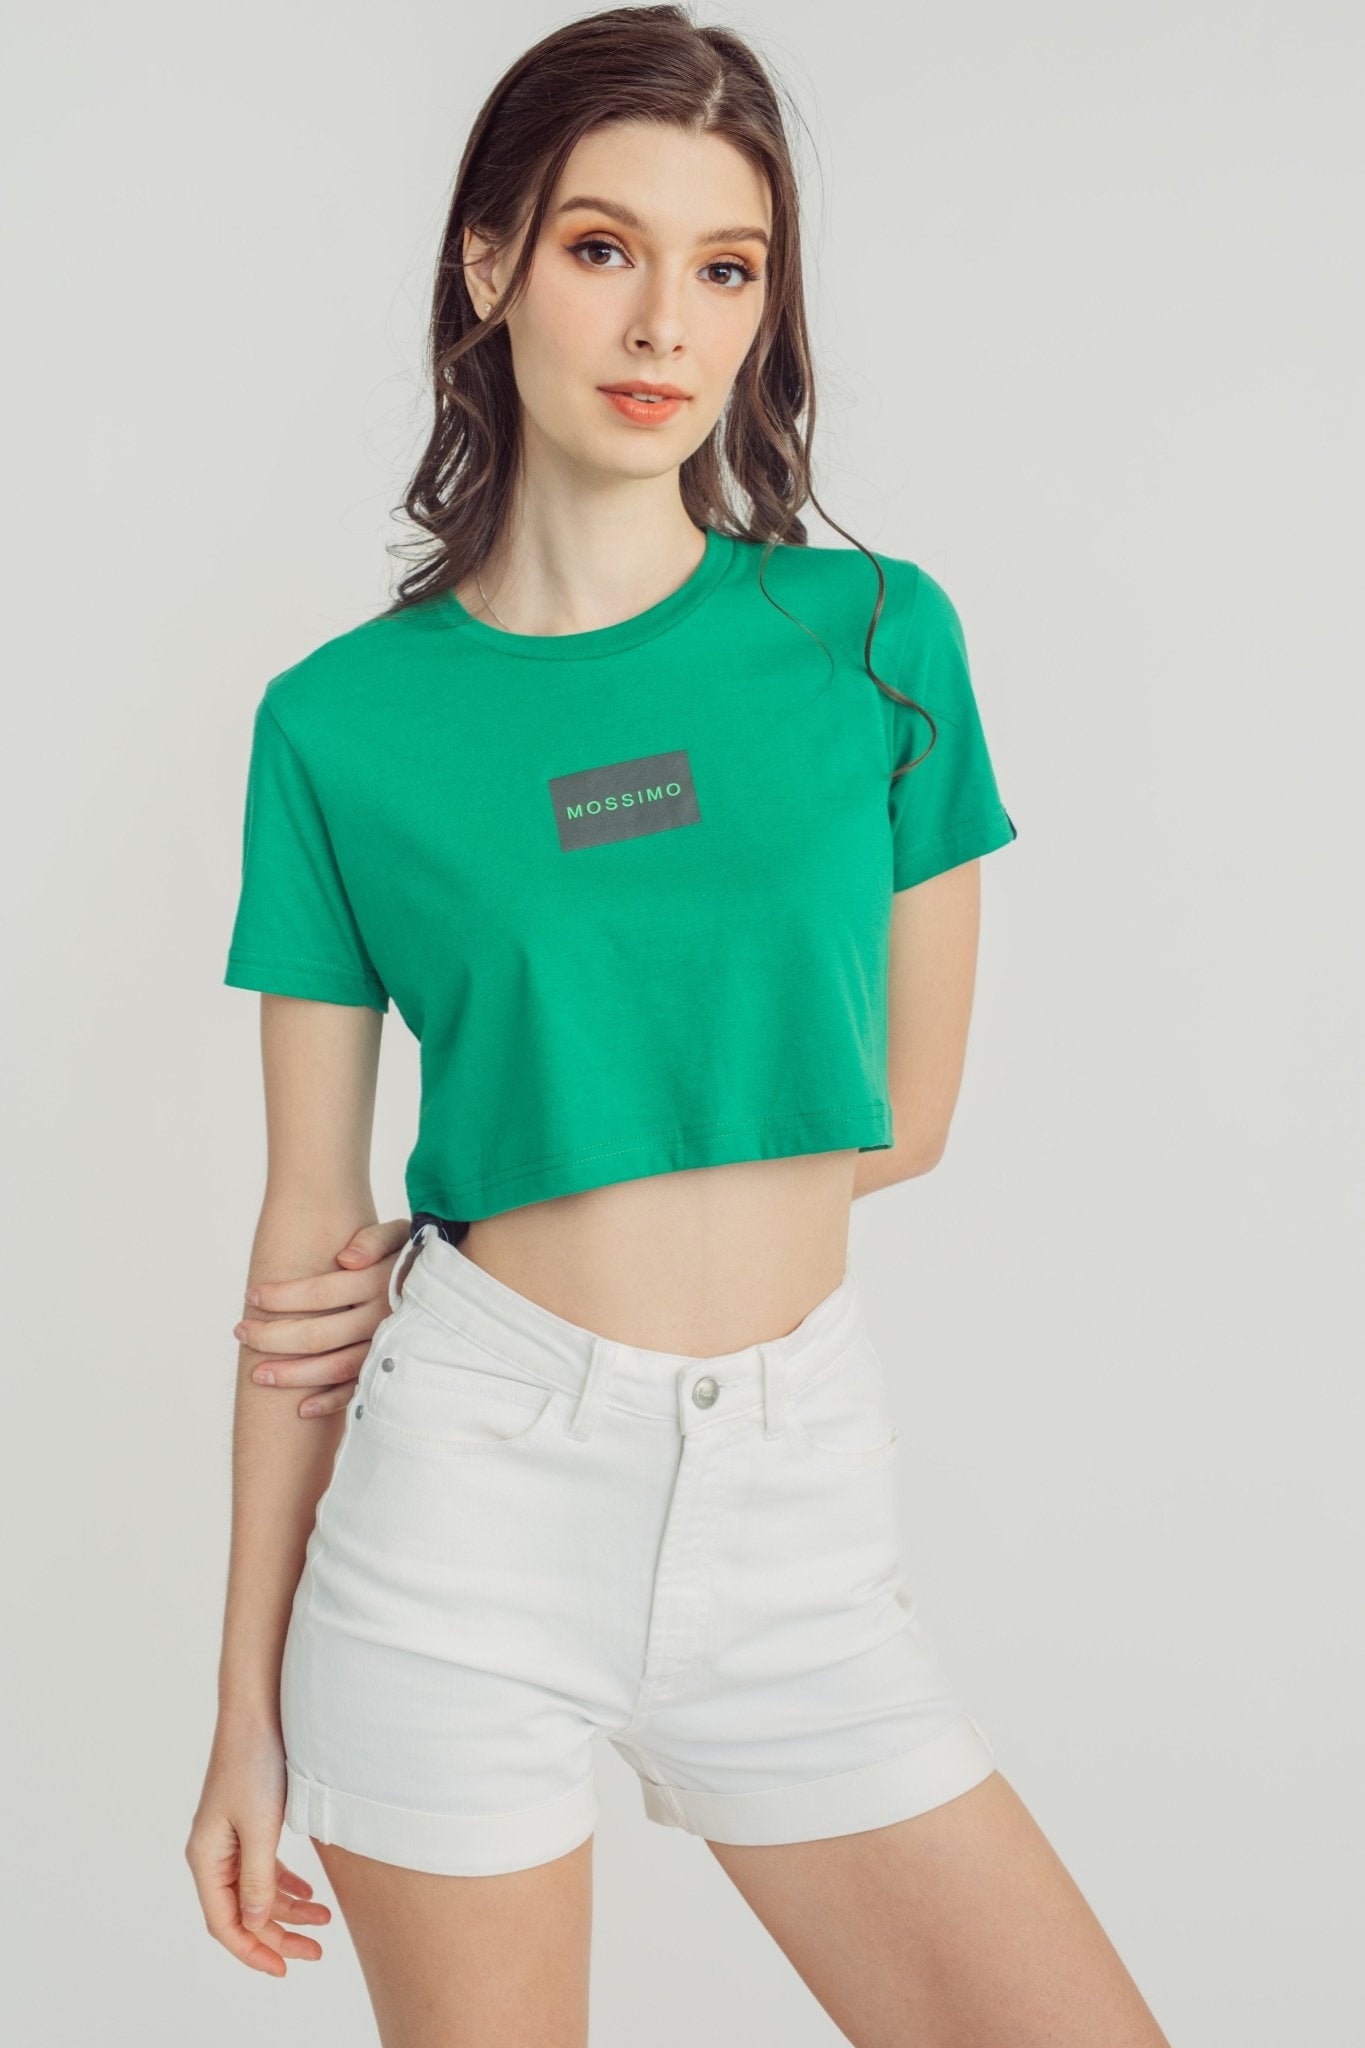 Jelly Bean with Small Branding Mossimo Boxed Design Vintage Cropped Fit Tee - Mossimo PH